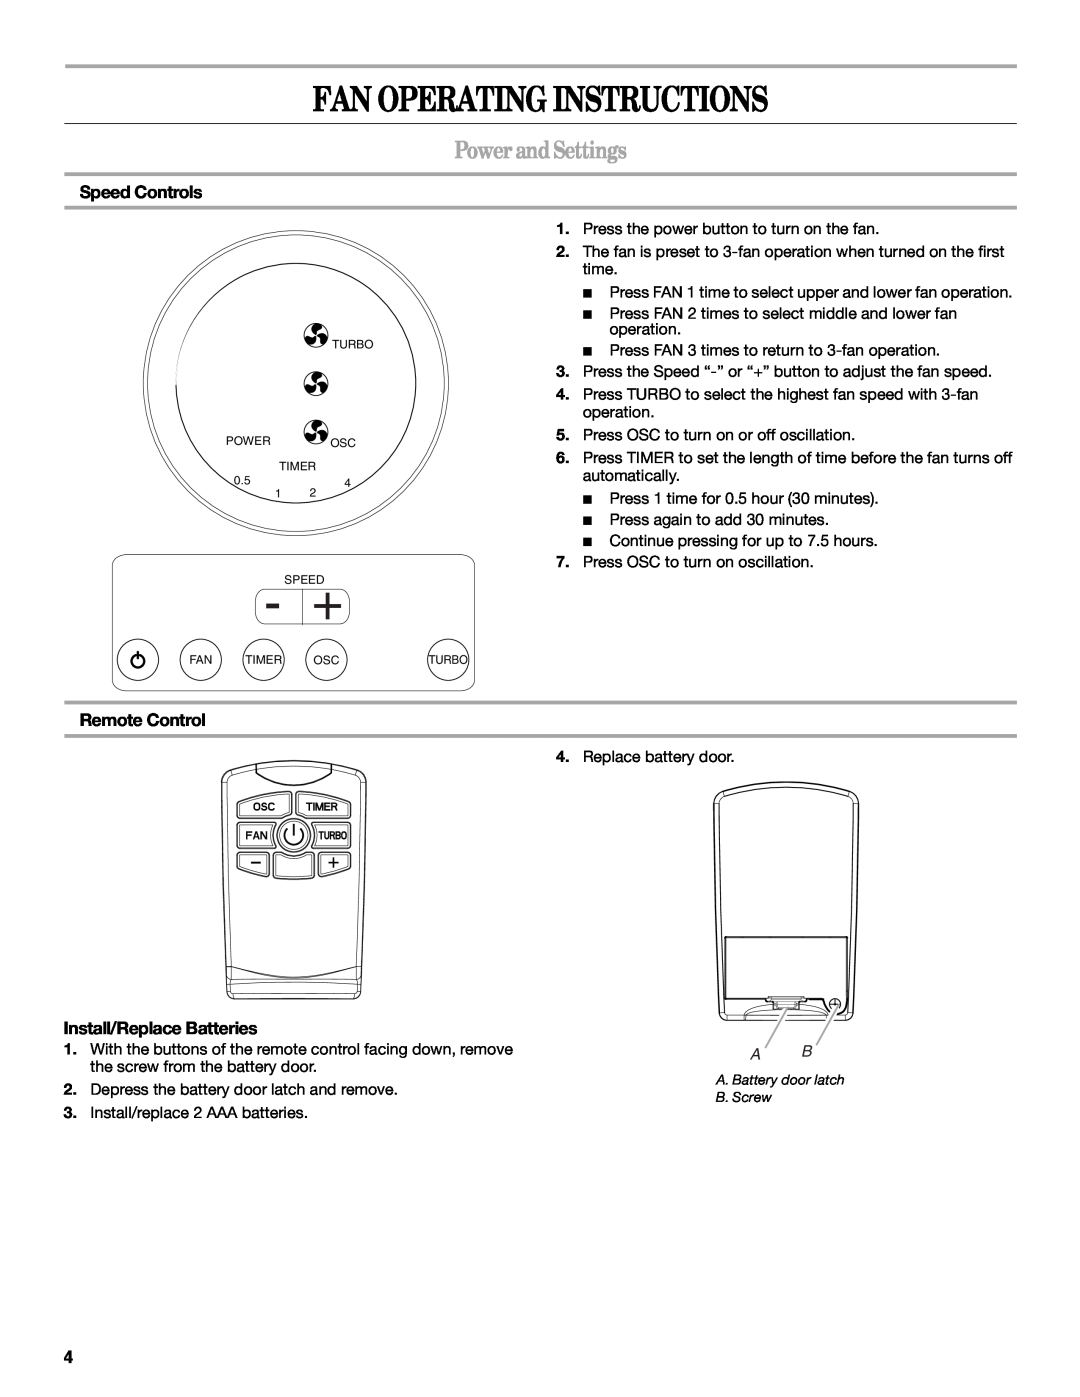 Whirlpool WF4235ER1 manual Fan Operating Instructions, Power and Settings, Speed Controls, Remote Control 